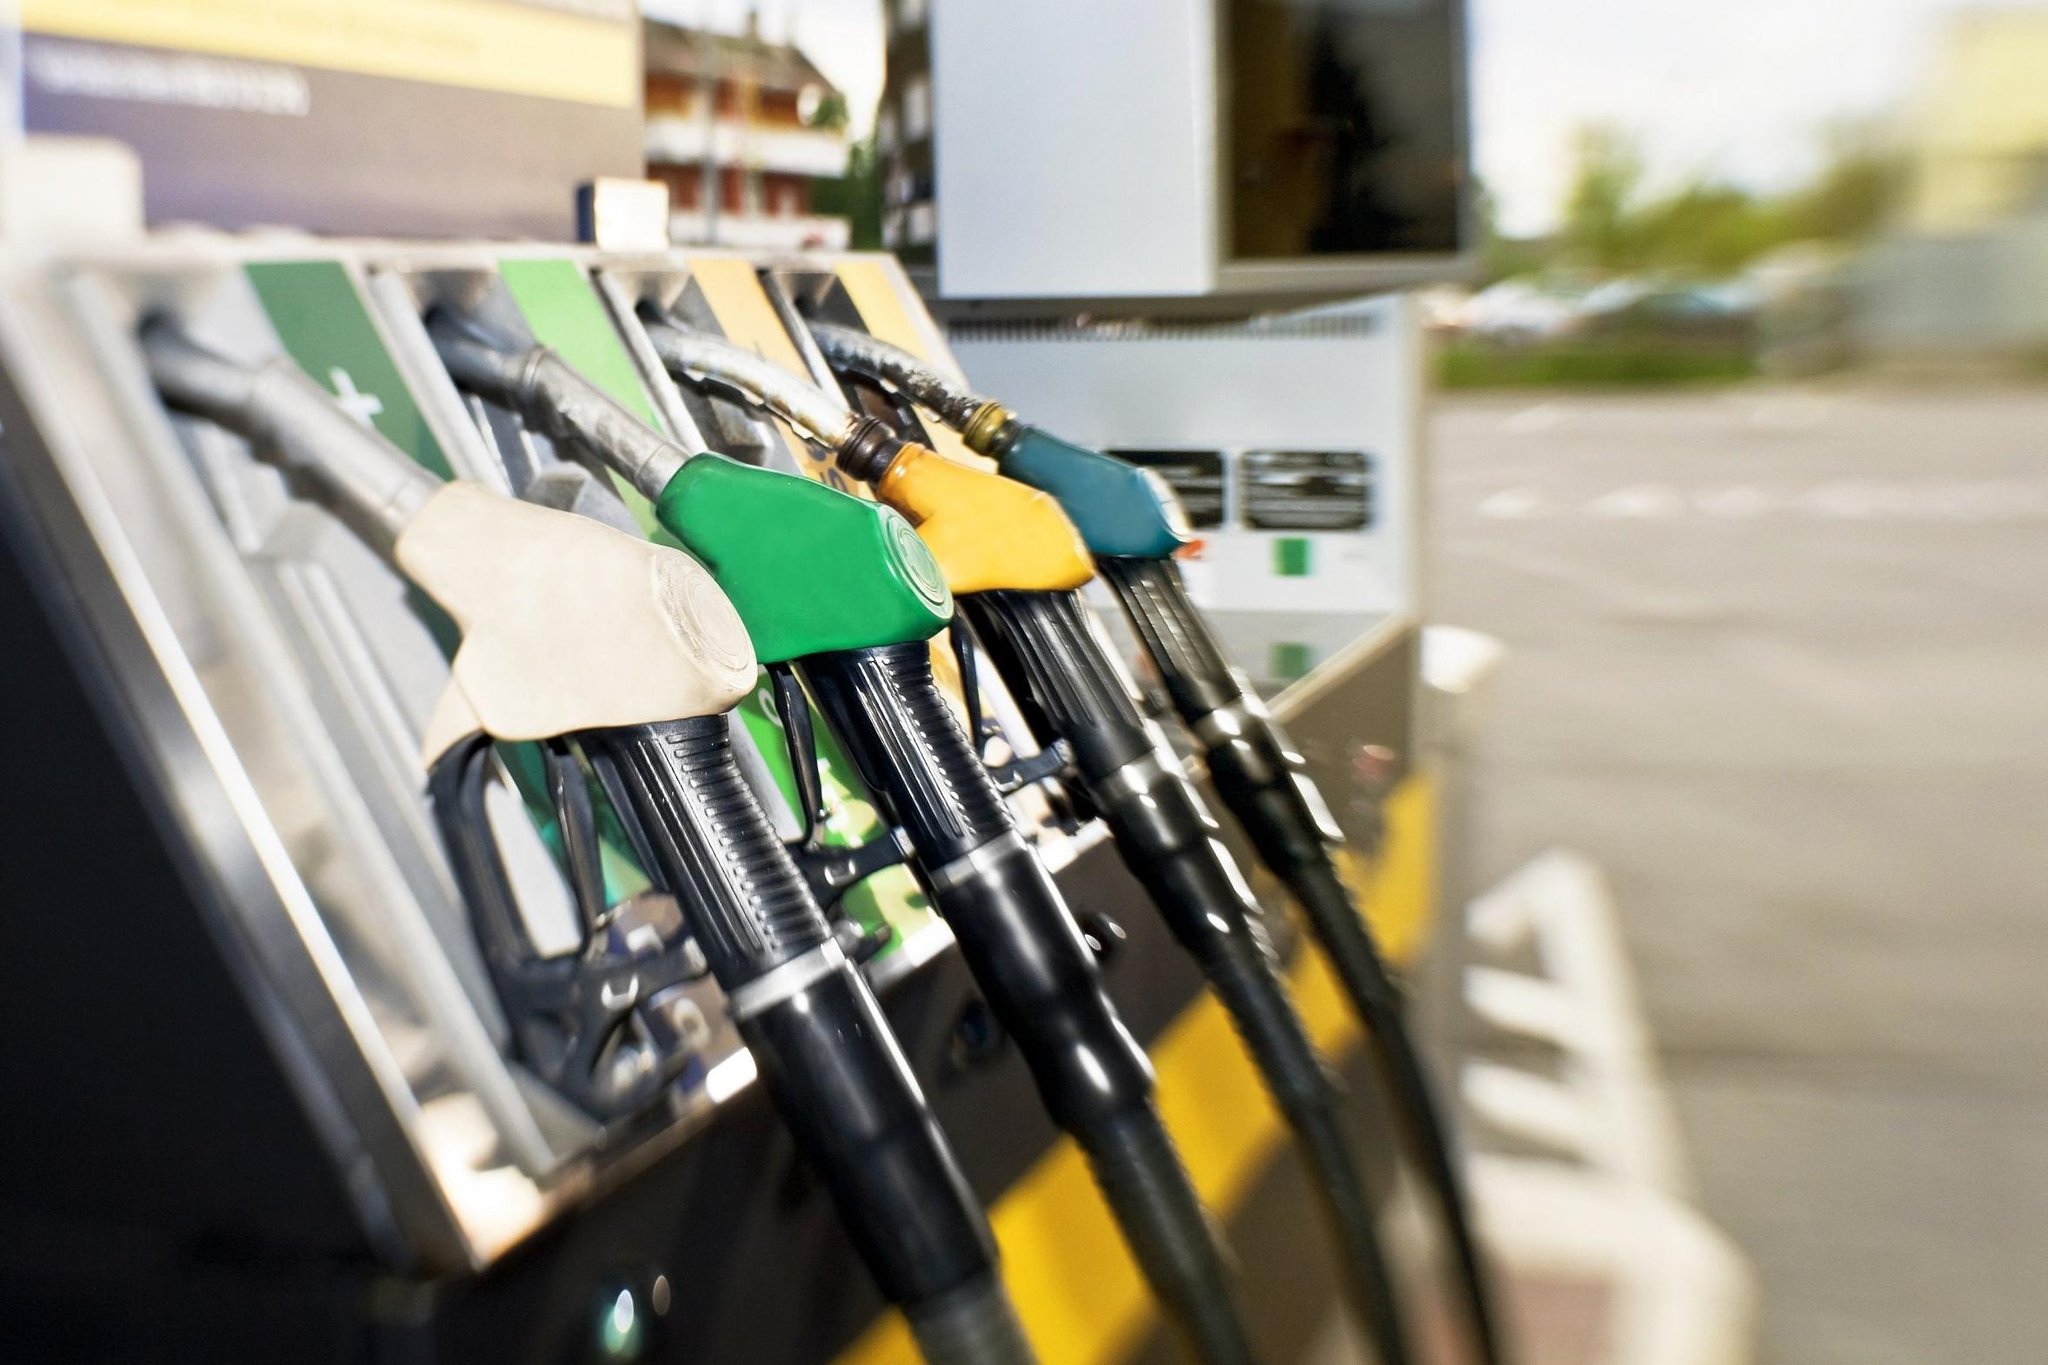 NI diesel and petrol prices rise but home heating oil costs fall